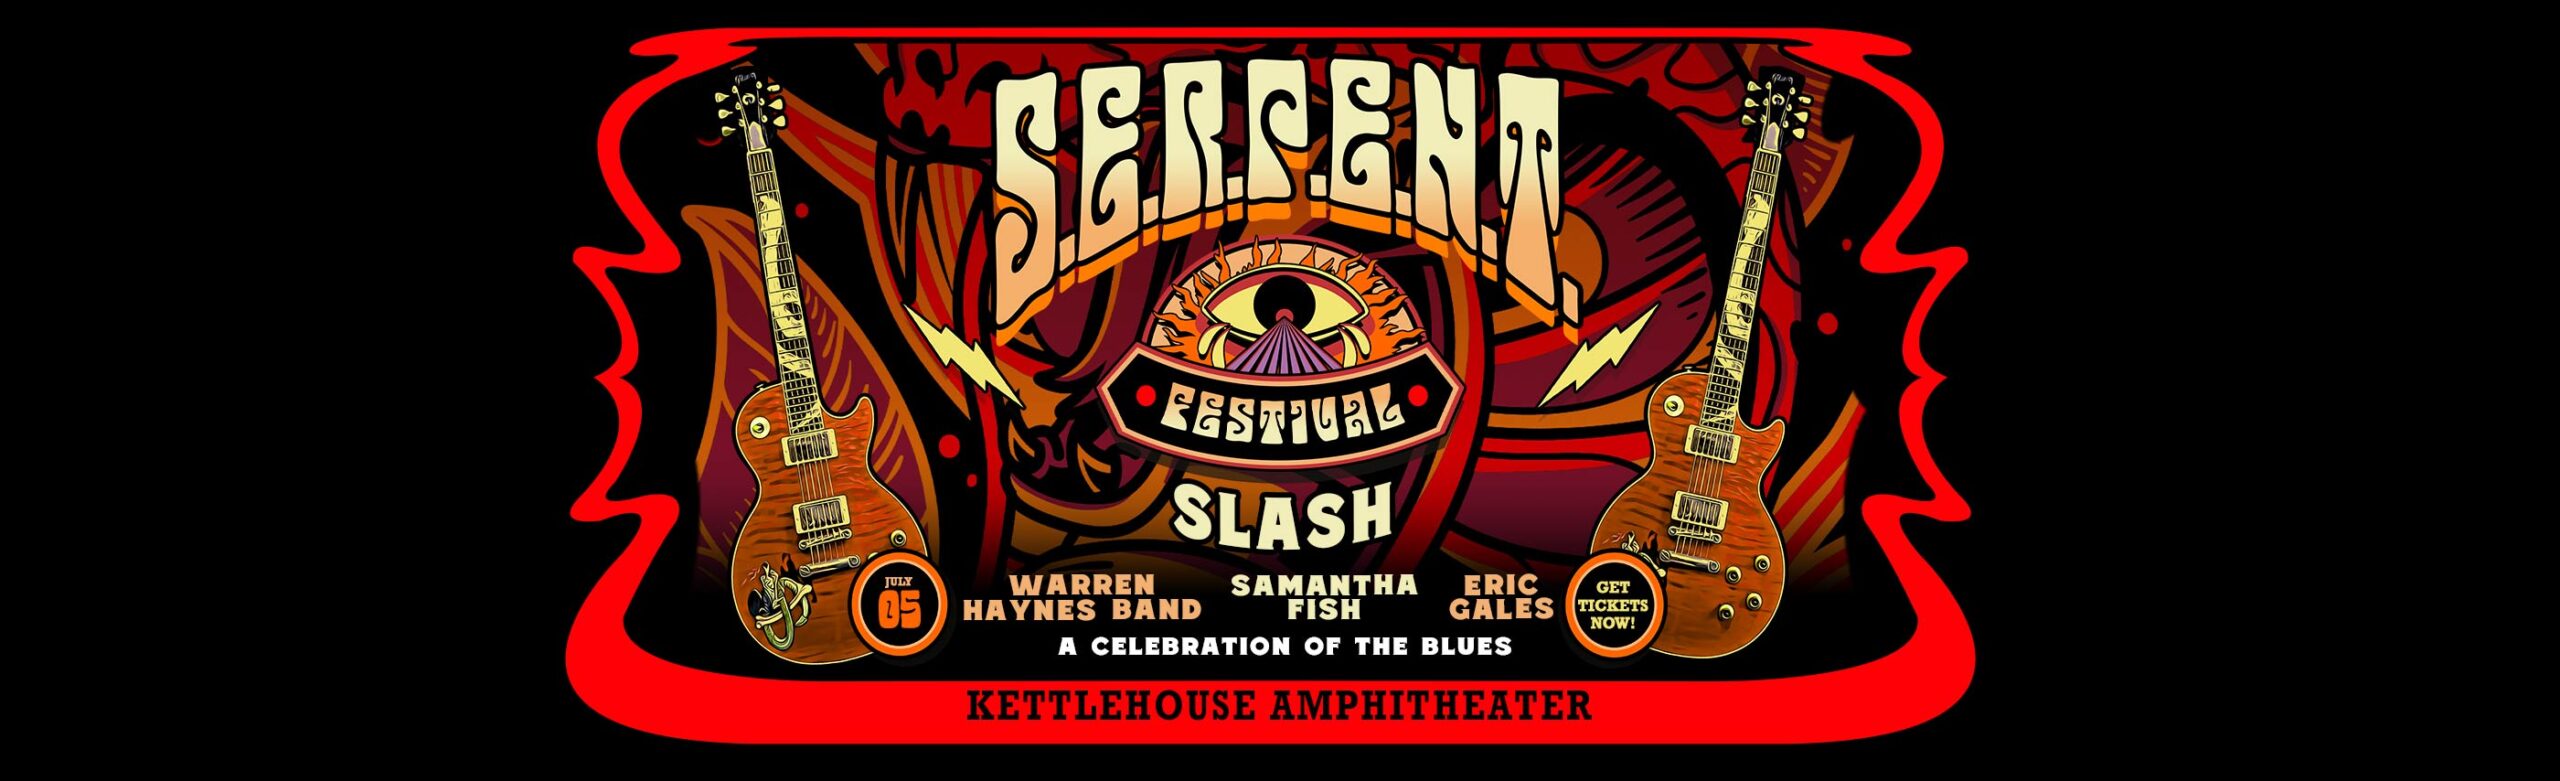 Slash Announces Concert at KettleHouse Amphitheater with Warren Haynes Band, Samantha Fish, and Eric Gales Image